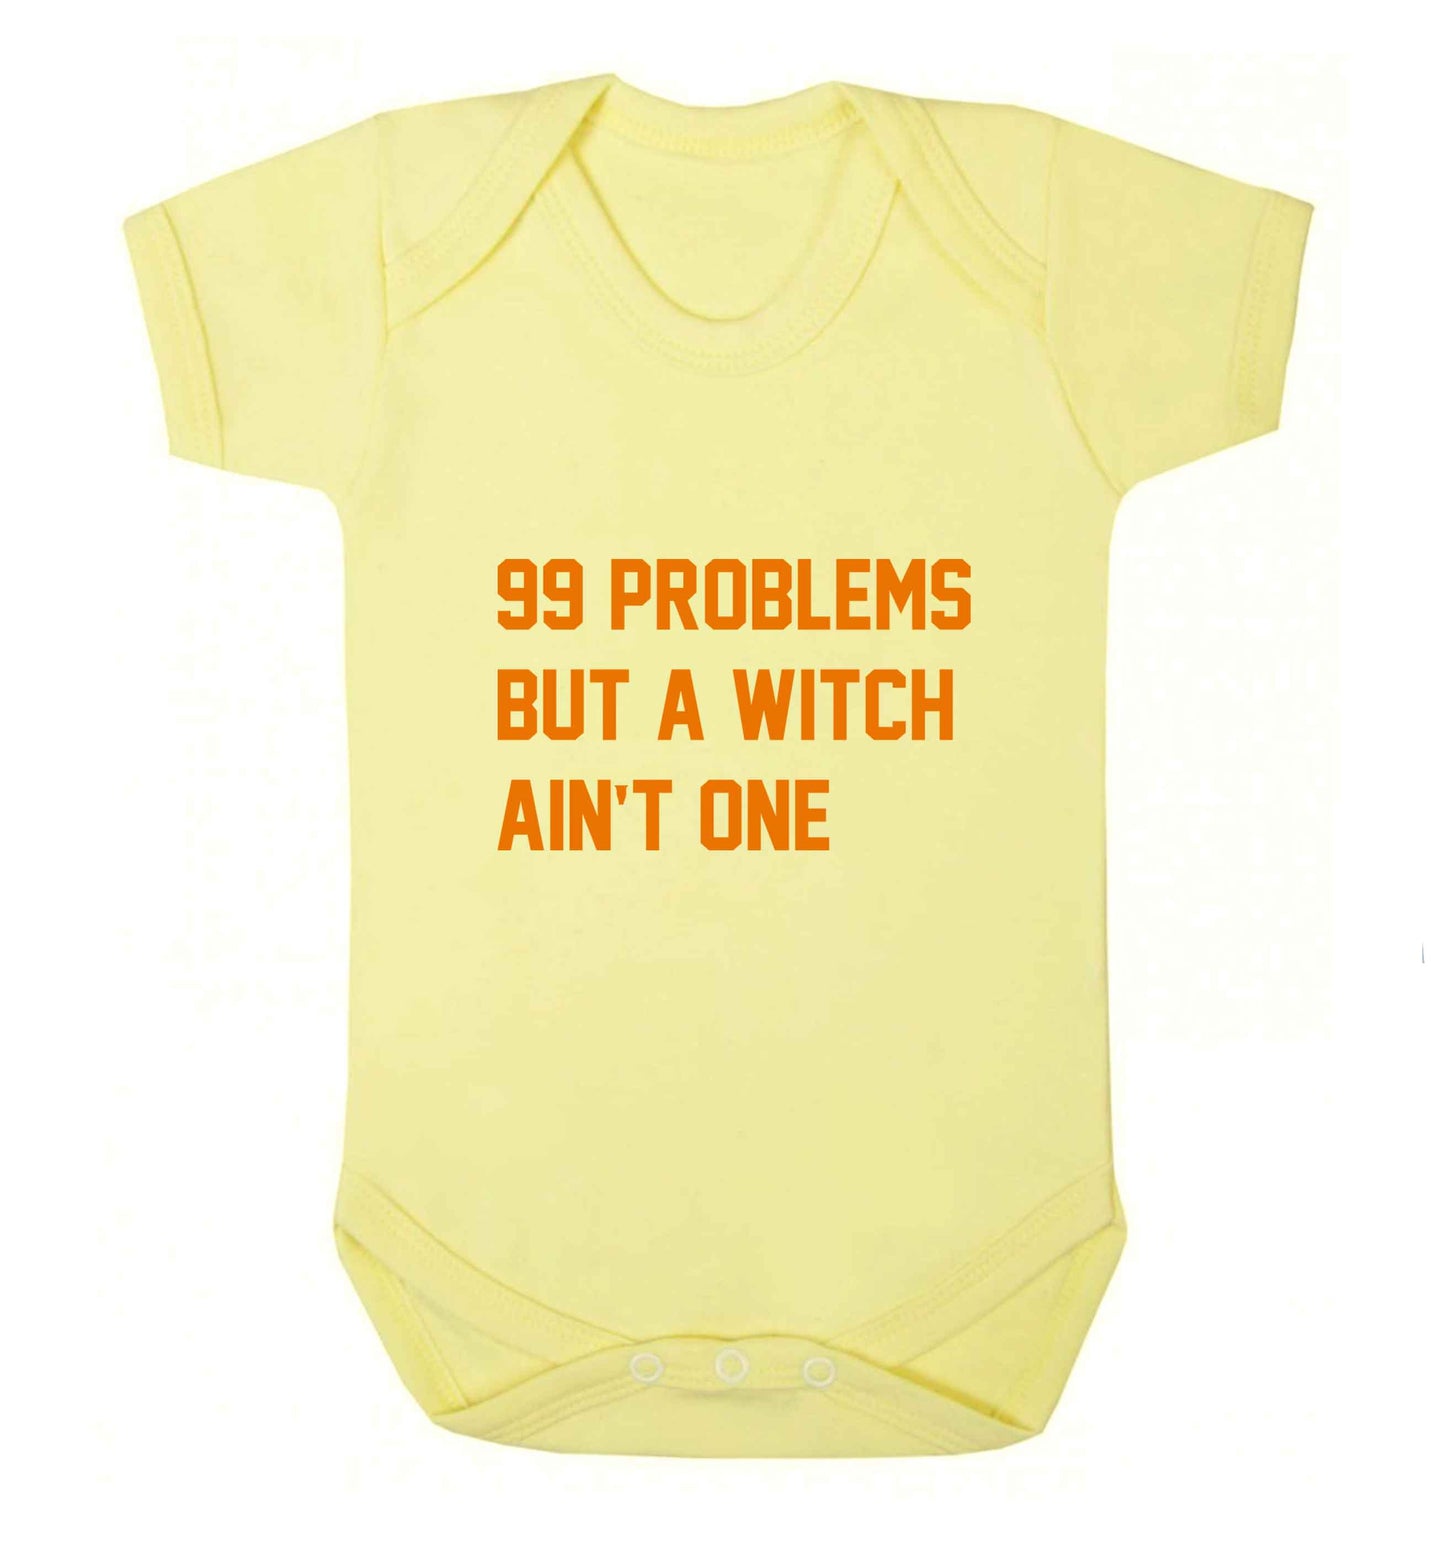 99 Problems but a witch aint one baby vest pale yellow 18-24 months